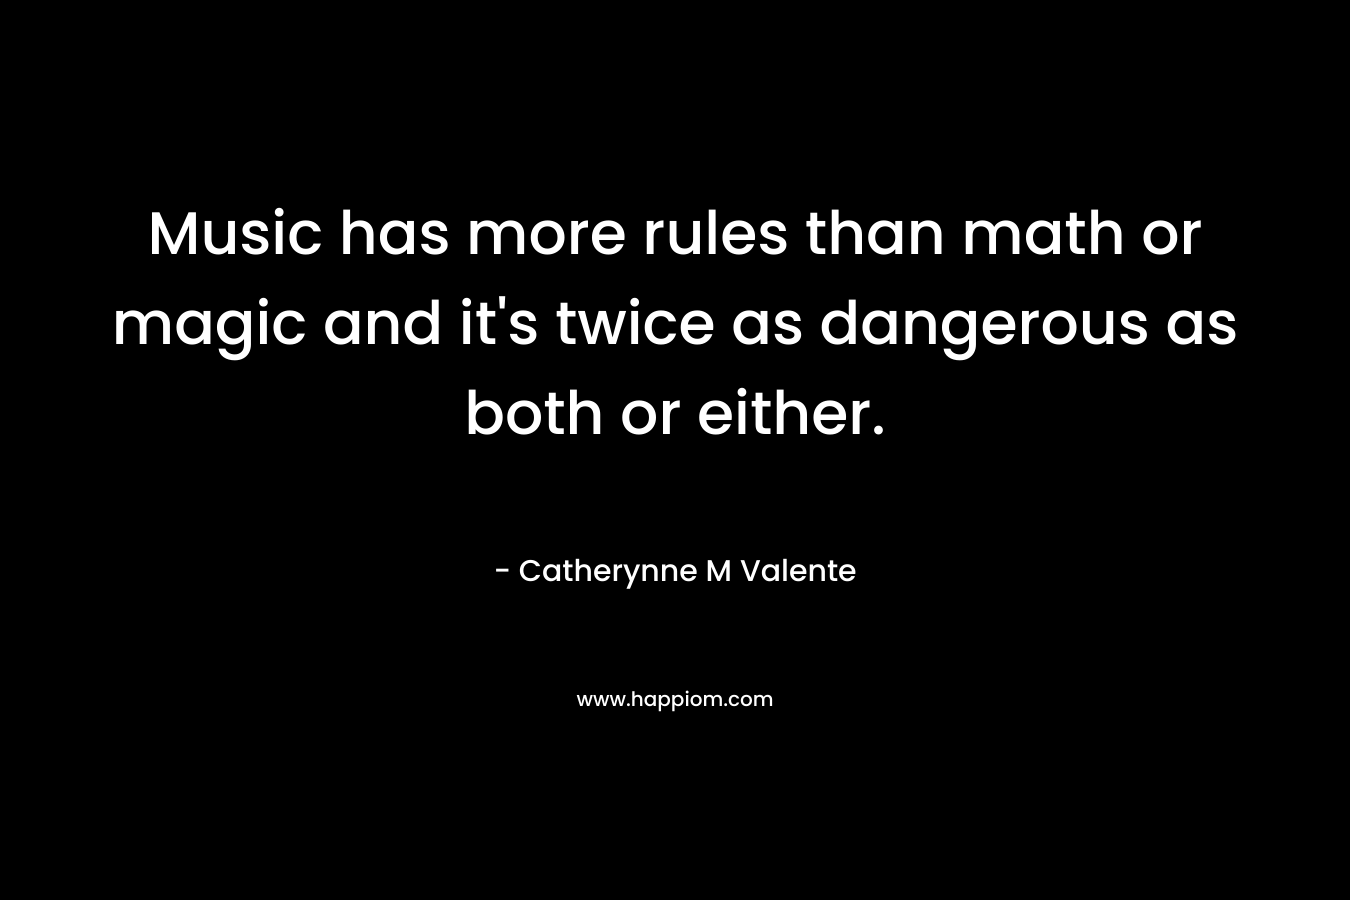 Music has more rules than math or magic and it’s twice as dangerous as both or either. – Catherynne M Valente